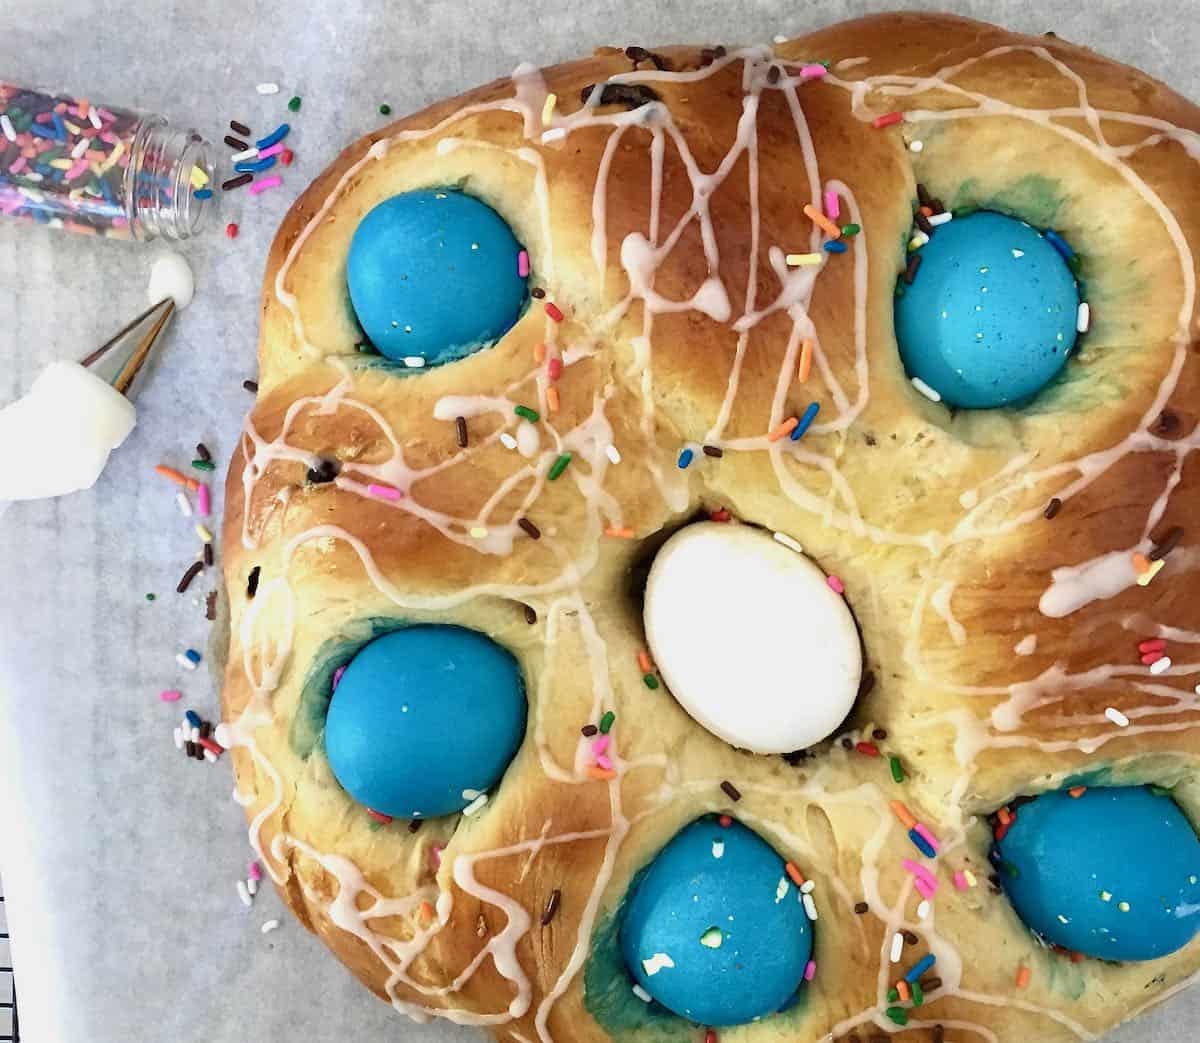 Braided Easter bread with sprinkles and colored eggs.